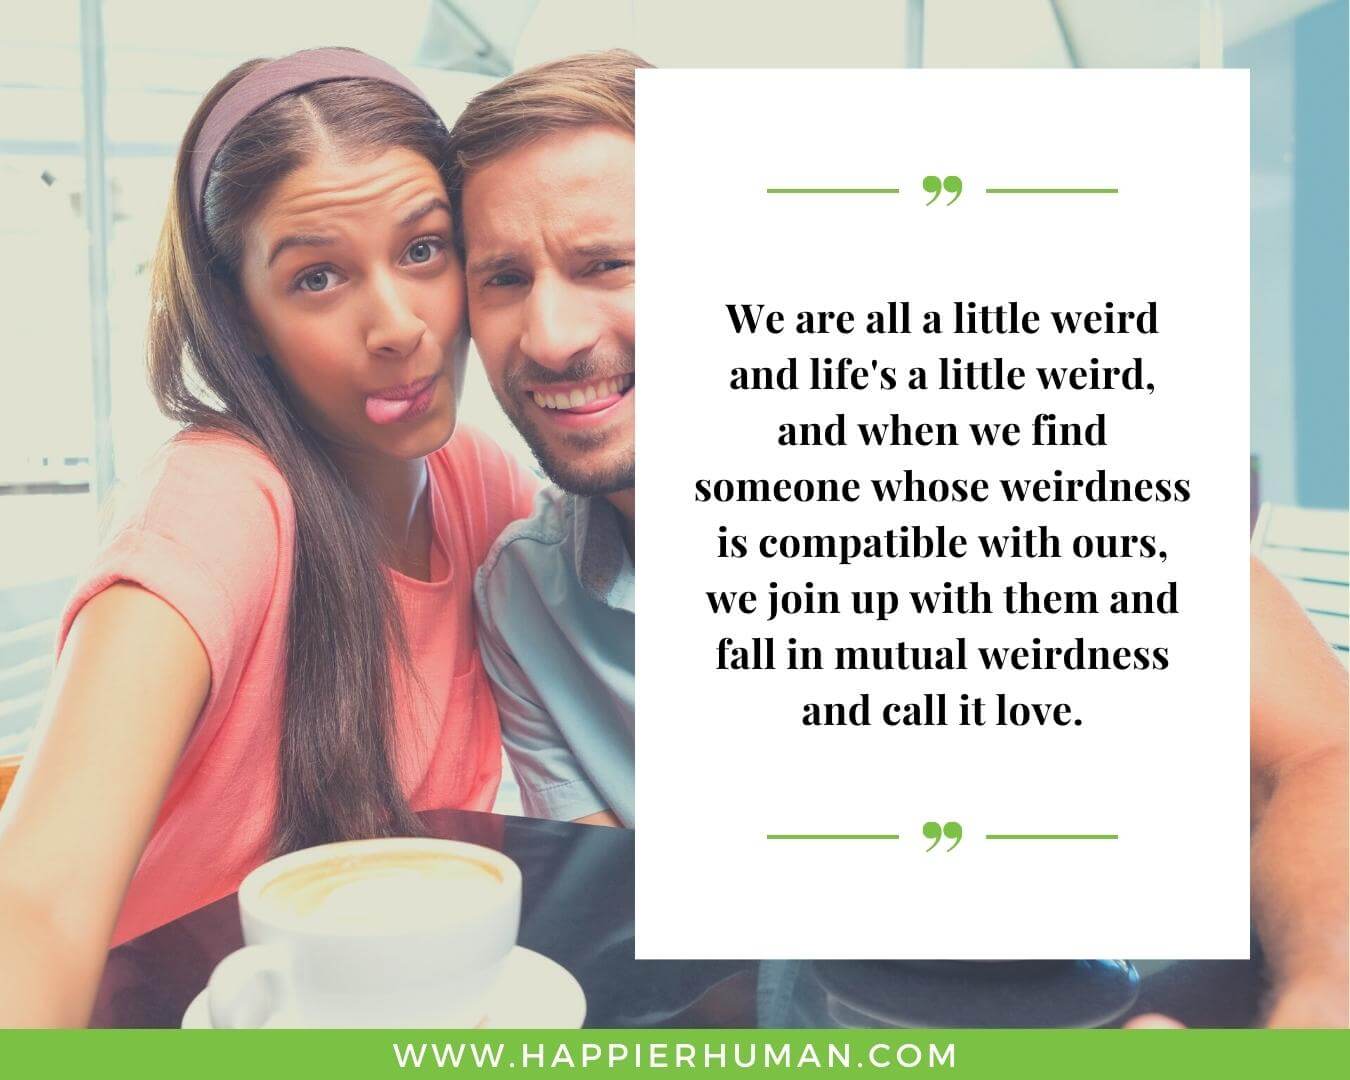 Real love quotes for Her - “We are all a little weird and life's a little weird, and when we find someone whose weirdness is compatible with ours, we join up with them and fall in mutual weirdness and call it love.”